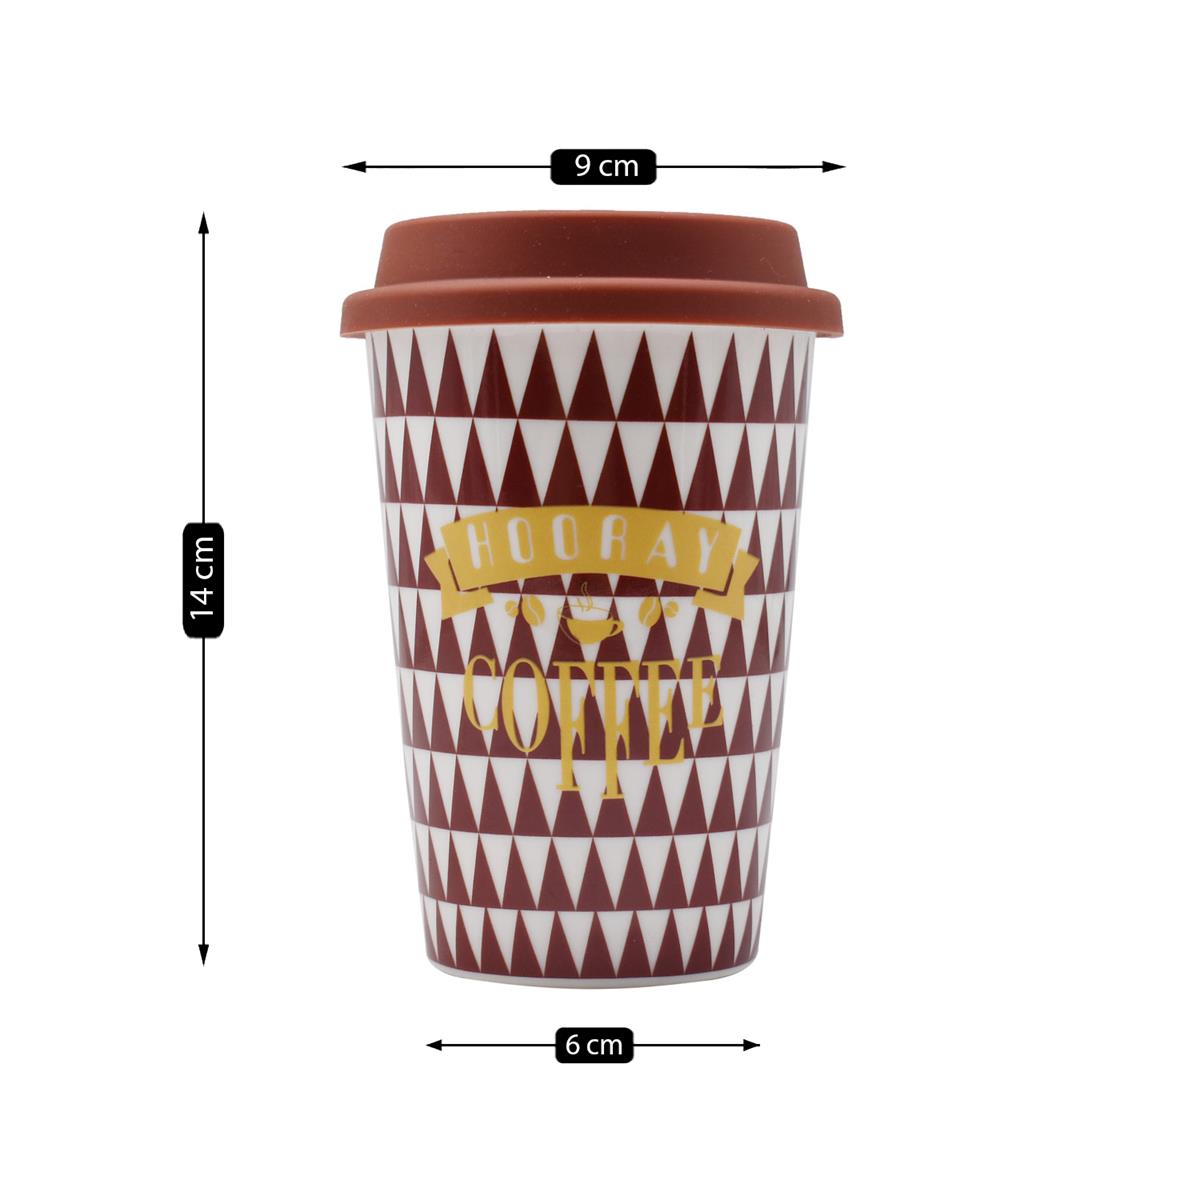 Ceramic Coffee or Tea Tall Tumbler with Silicone Lid - 275ml (BPM4875-D)